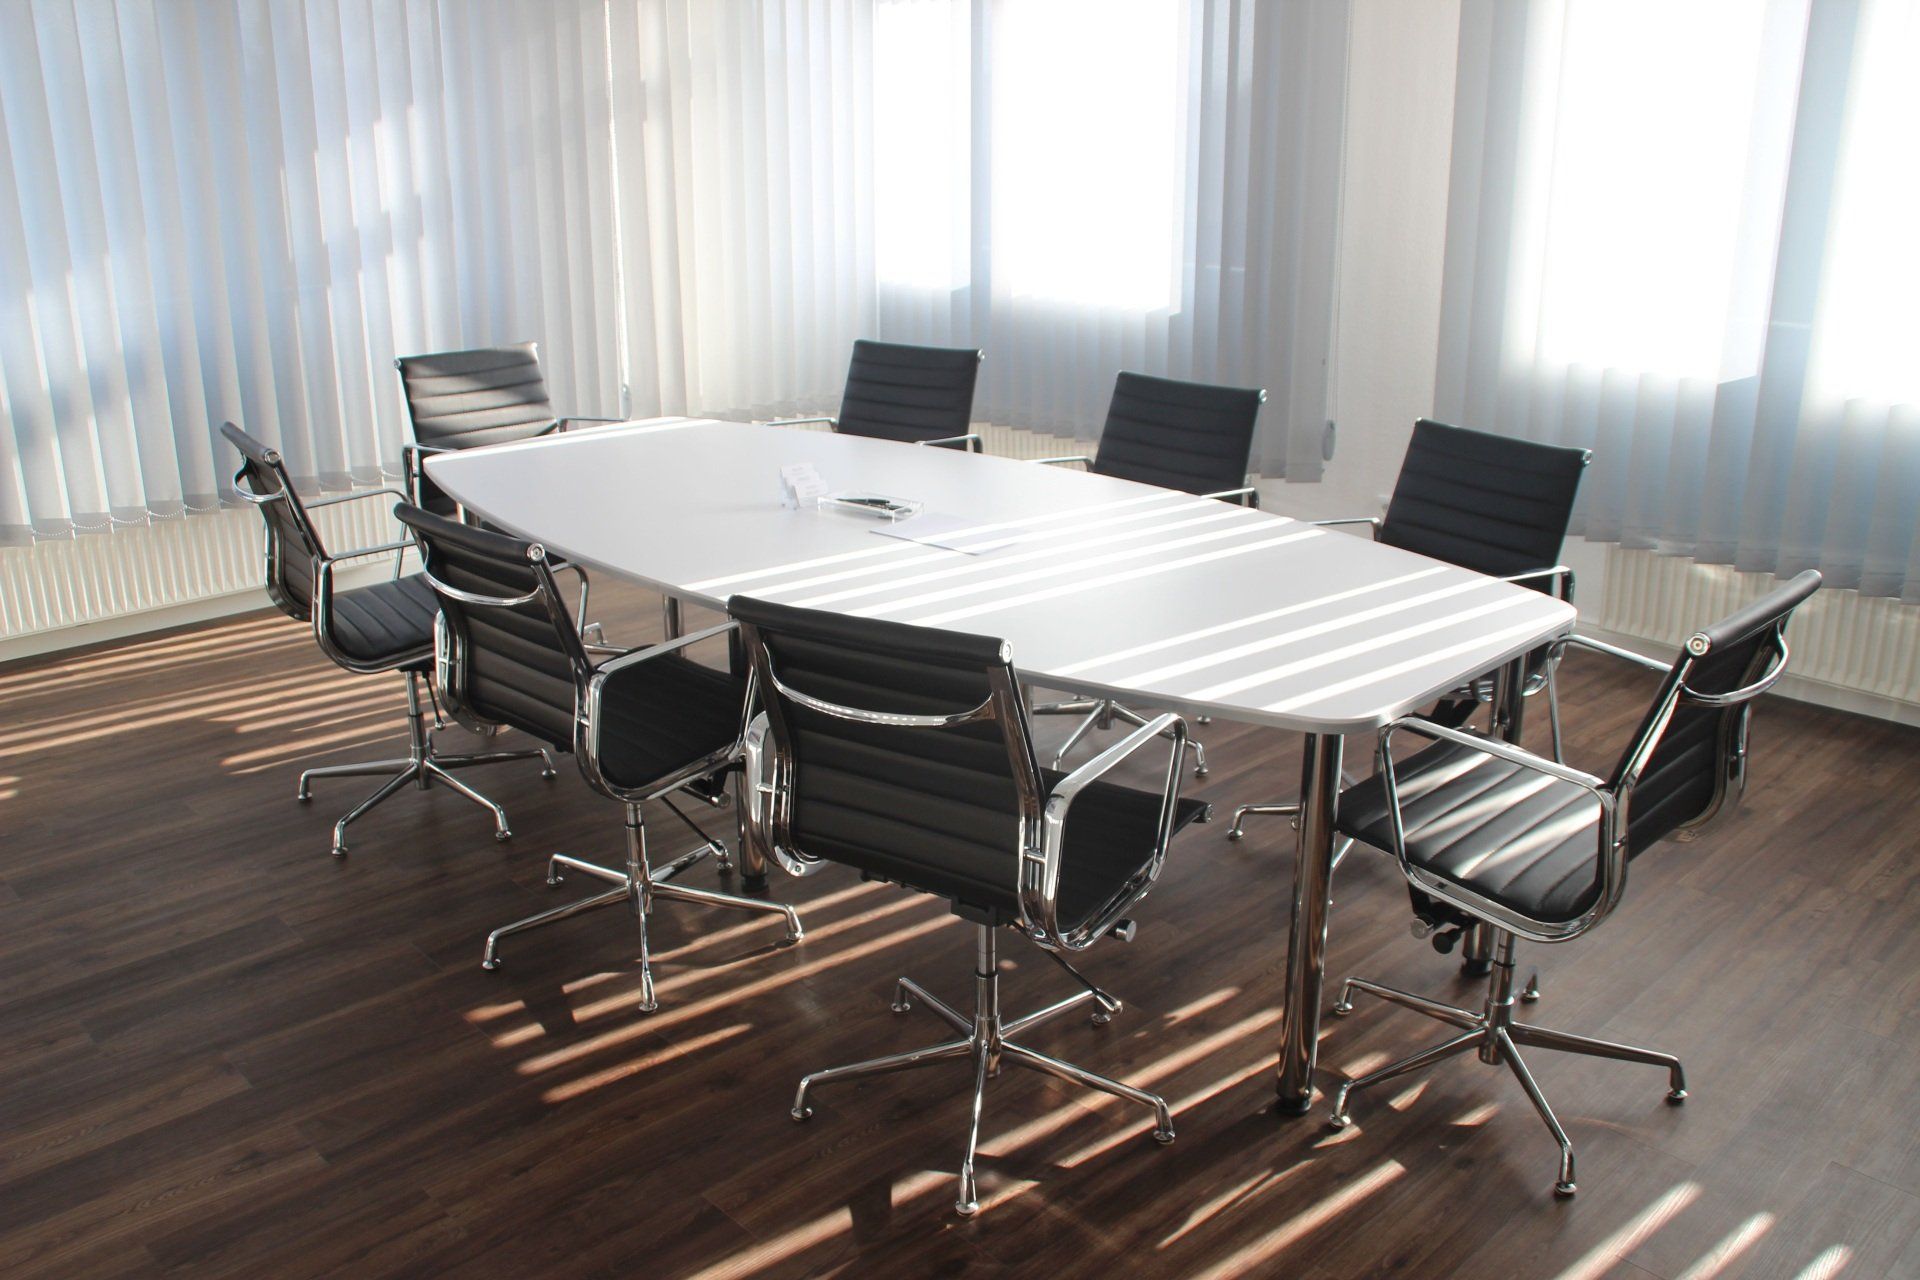 An image of a large desk in center of a group room with empty chairs around the table.